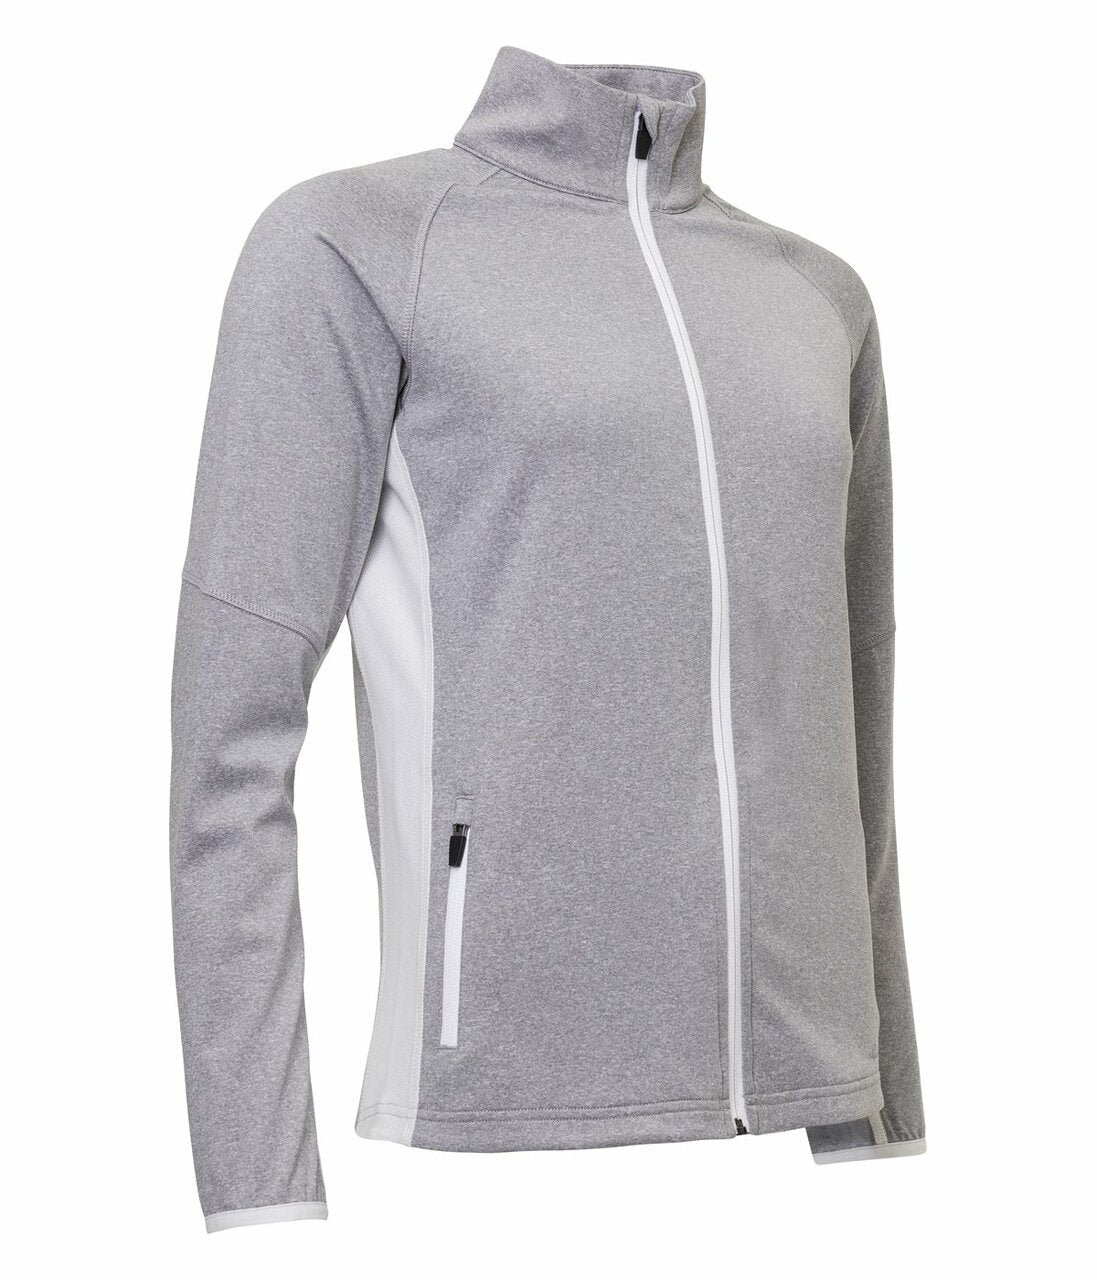 Abacus Sports Wear: Women’s High-Performance Golf Fullzip with Pockets – Ashby